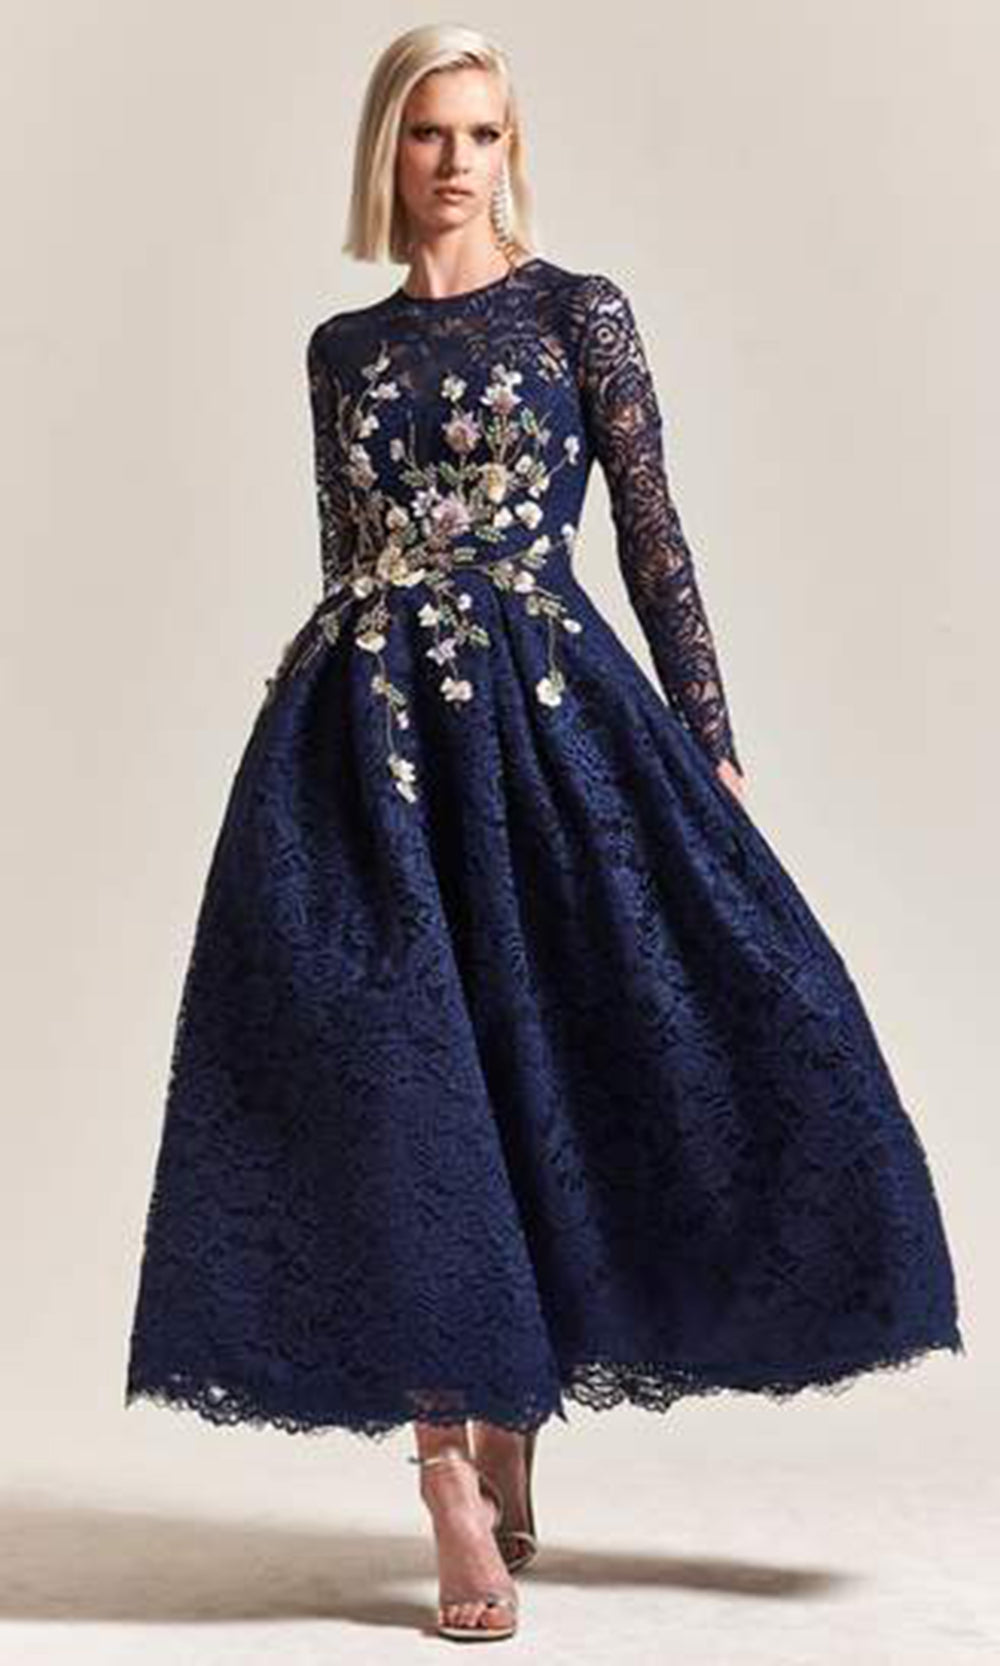 Park 108 - Floral Embroidered Jewel Cocktail Dress M302 - 1 pc Navy In Size 8 Available CCSALE 8 / Navy